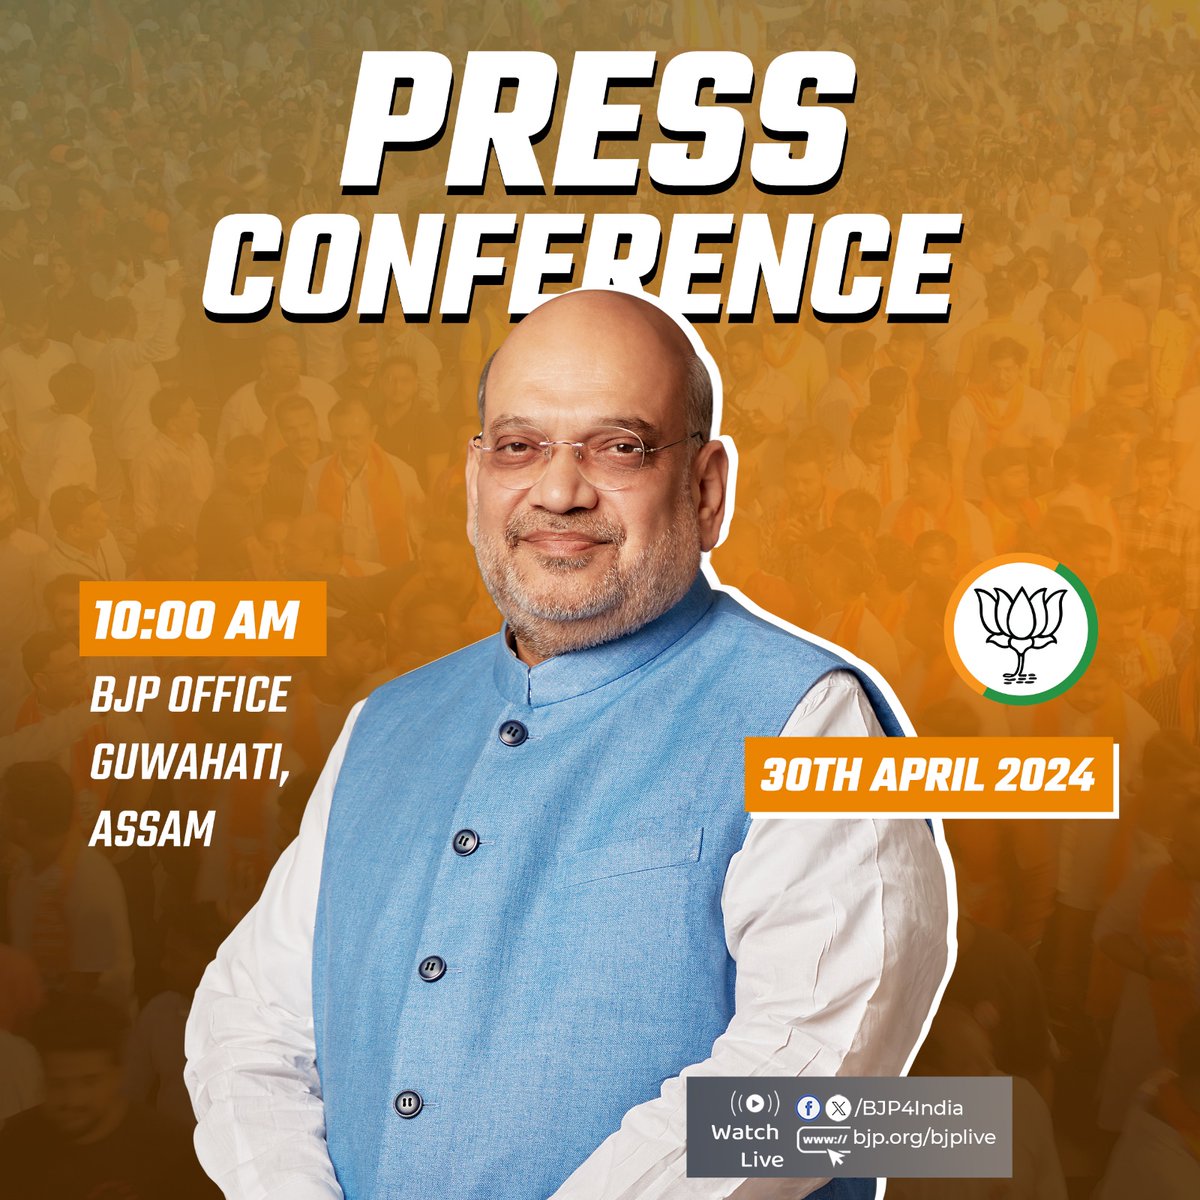 Union Home Minister and Minister of Cooperation Shri @AmitShah will hold a press conference in Assam on 30th April 2024. Watch Live: 📺twitter.com/BJP4India 📺facebook.com/BJP4India 📺youtube.com/BJP4India 📺bjp.org/bjplive